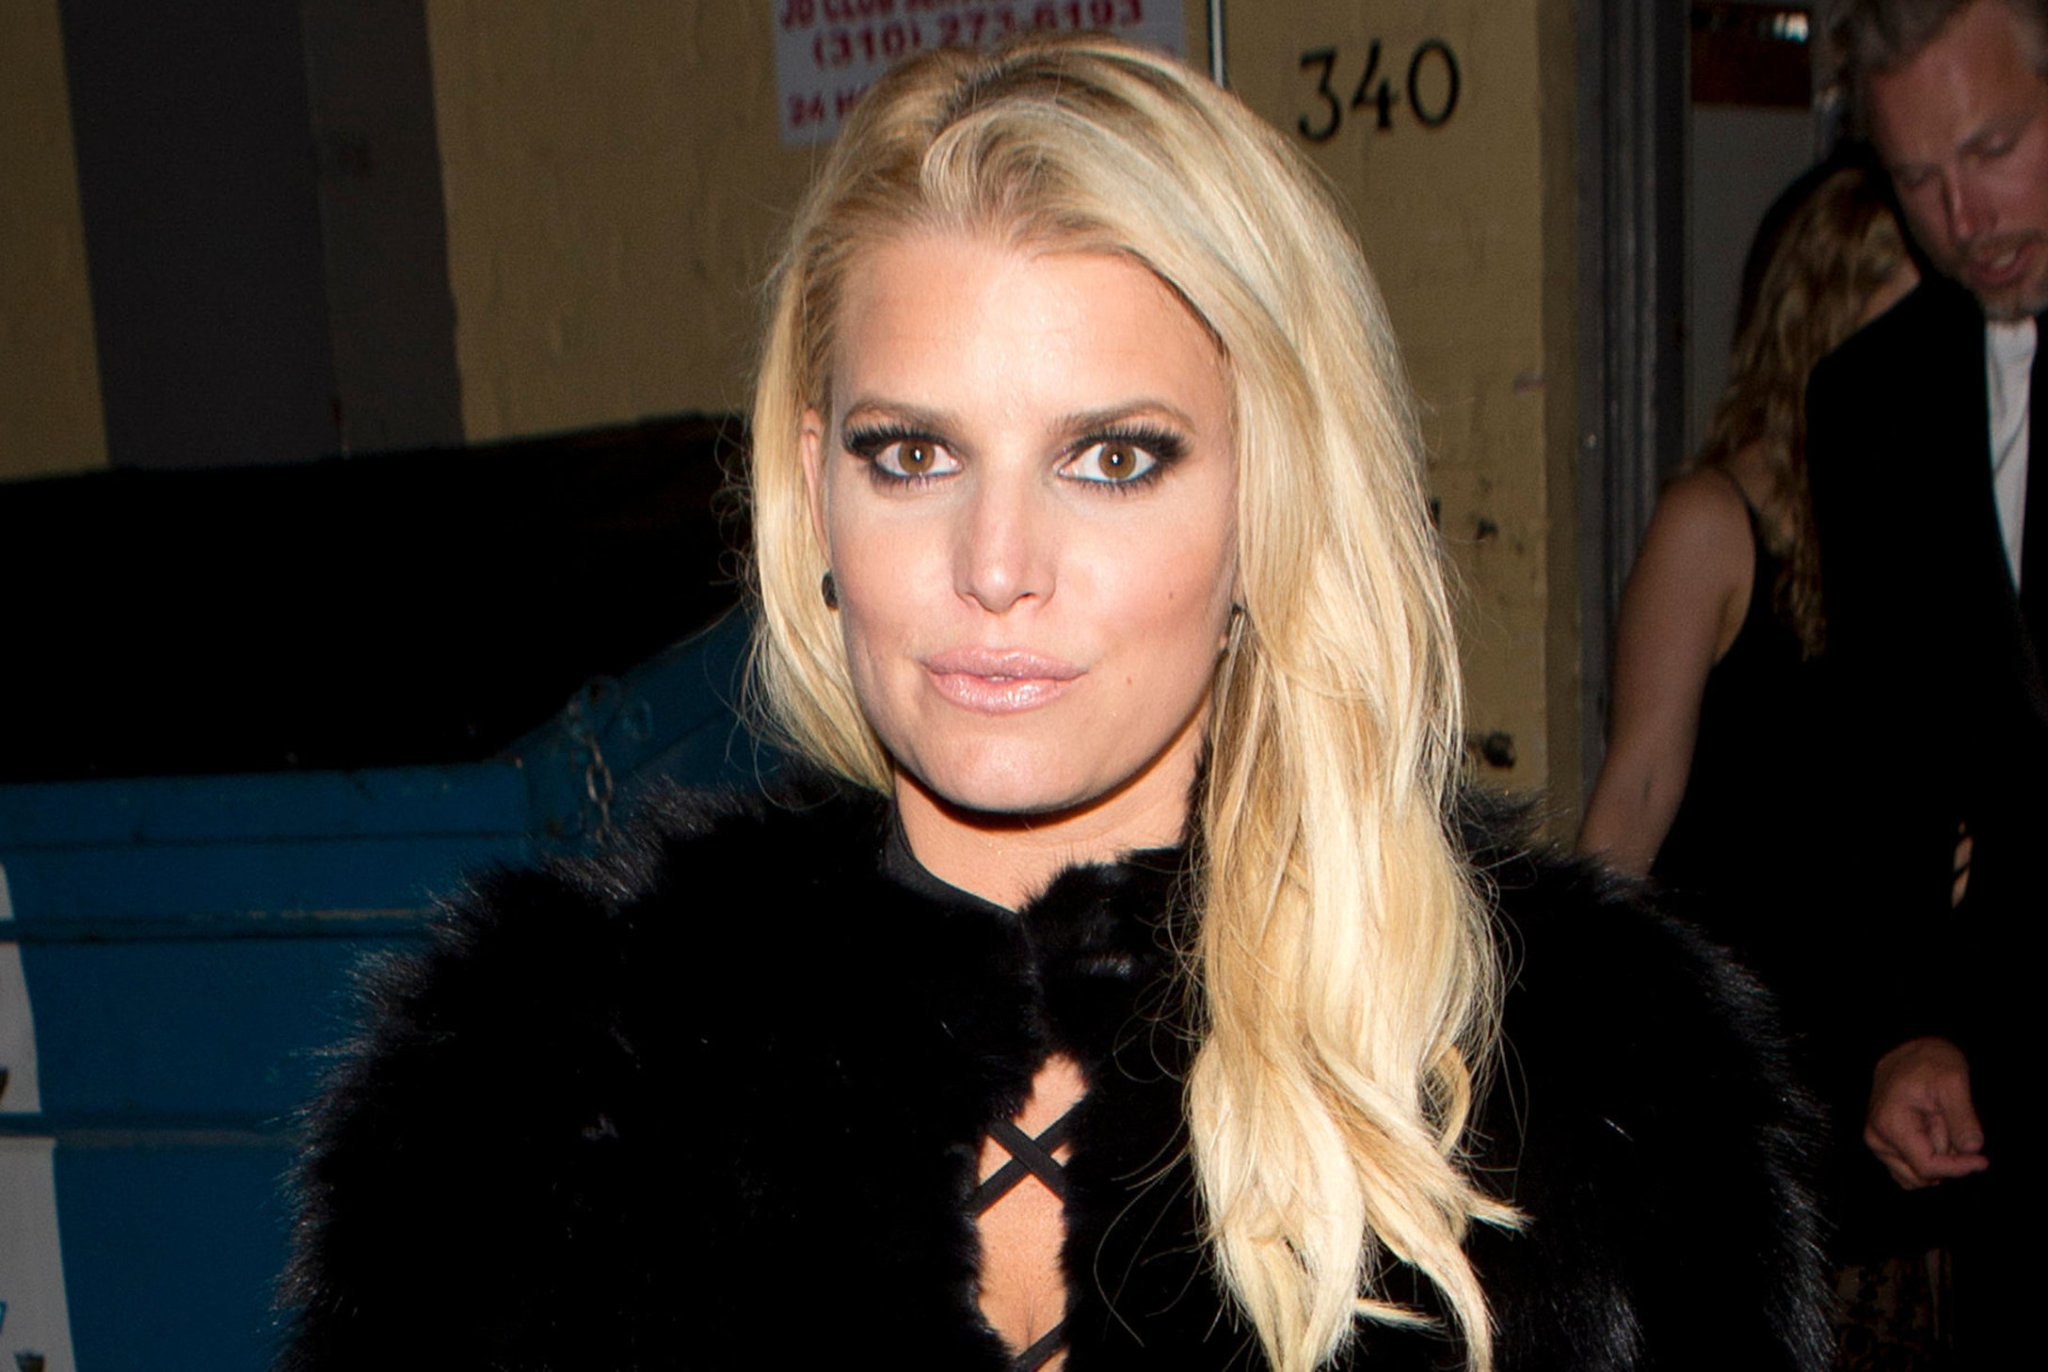 Jessica Simpson Shares a Raw Photo of Herself at Rock Bottom Before Getting Sober